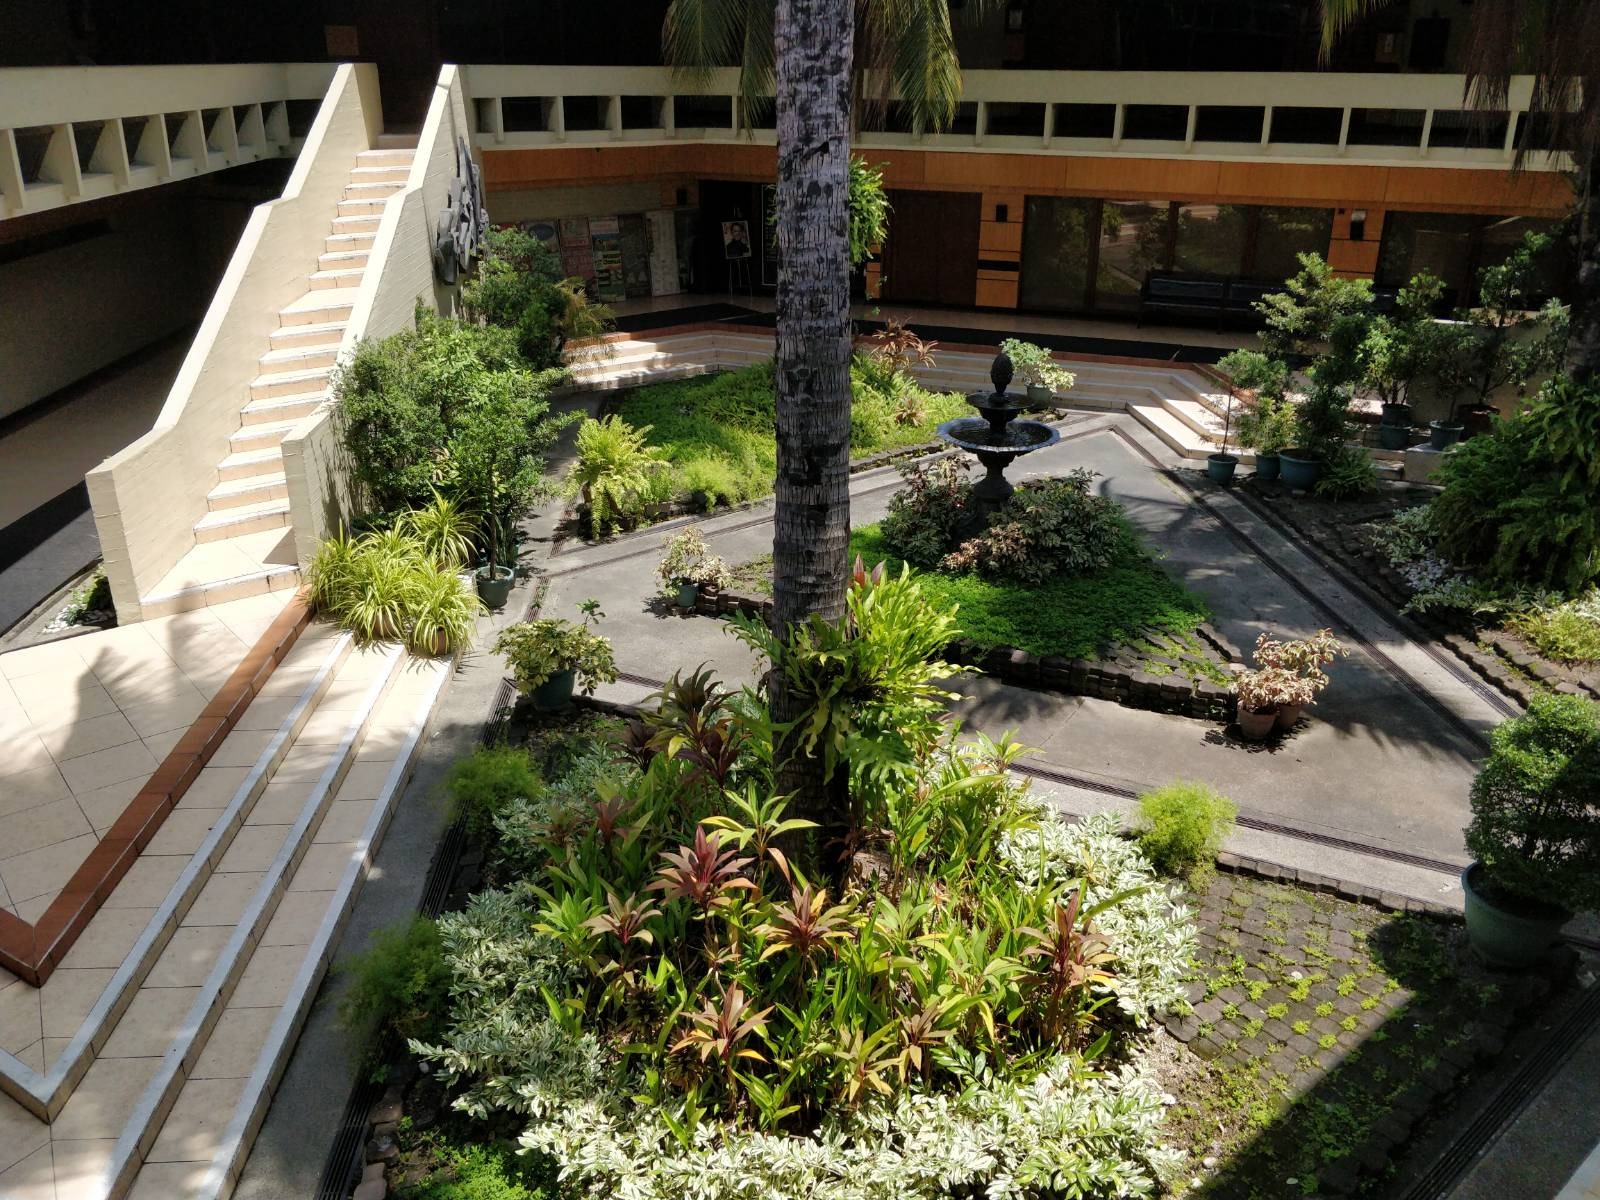 Courtyard of a brutalist architecture; it's garden is blooming with flora.